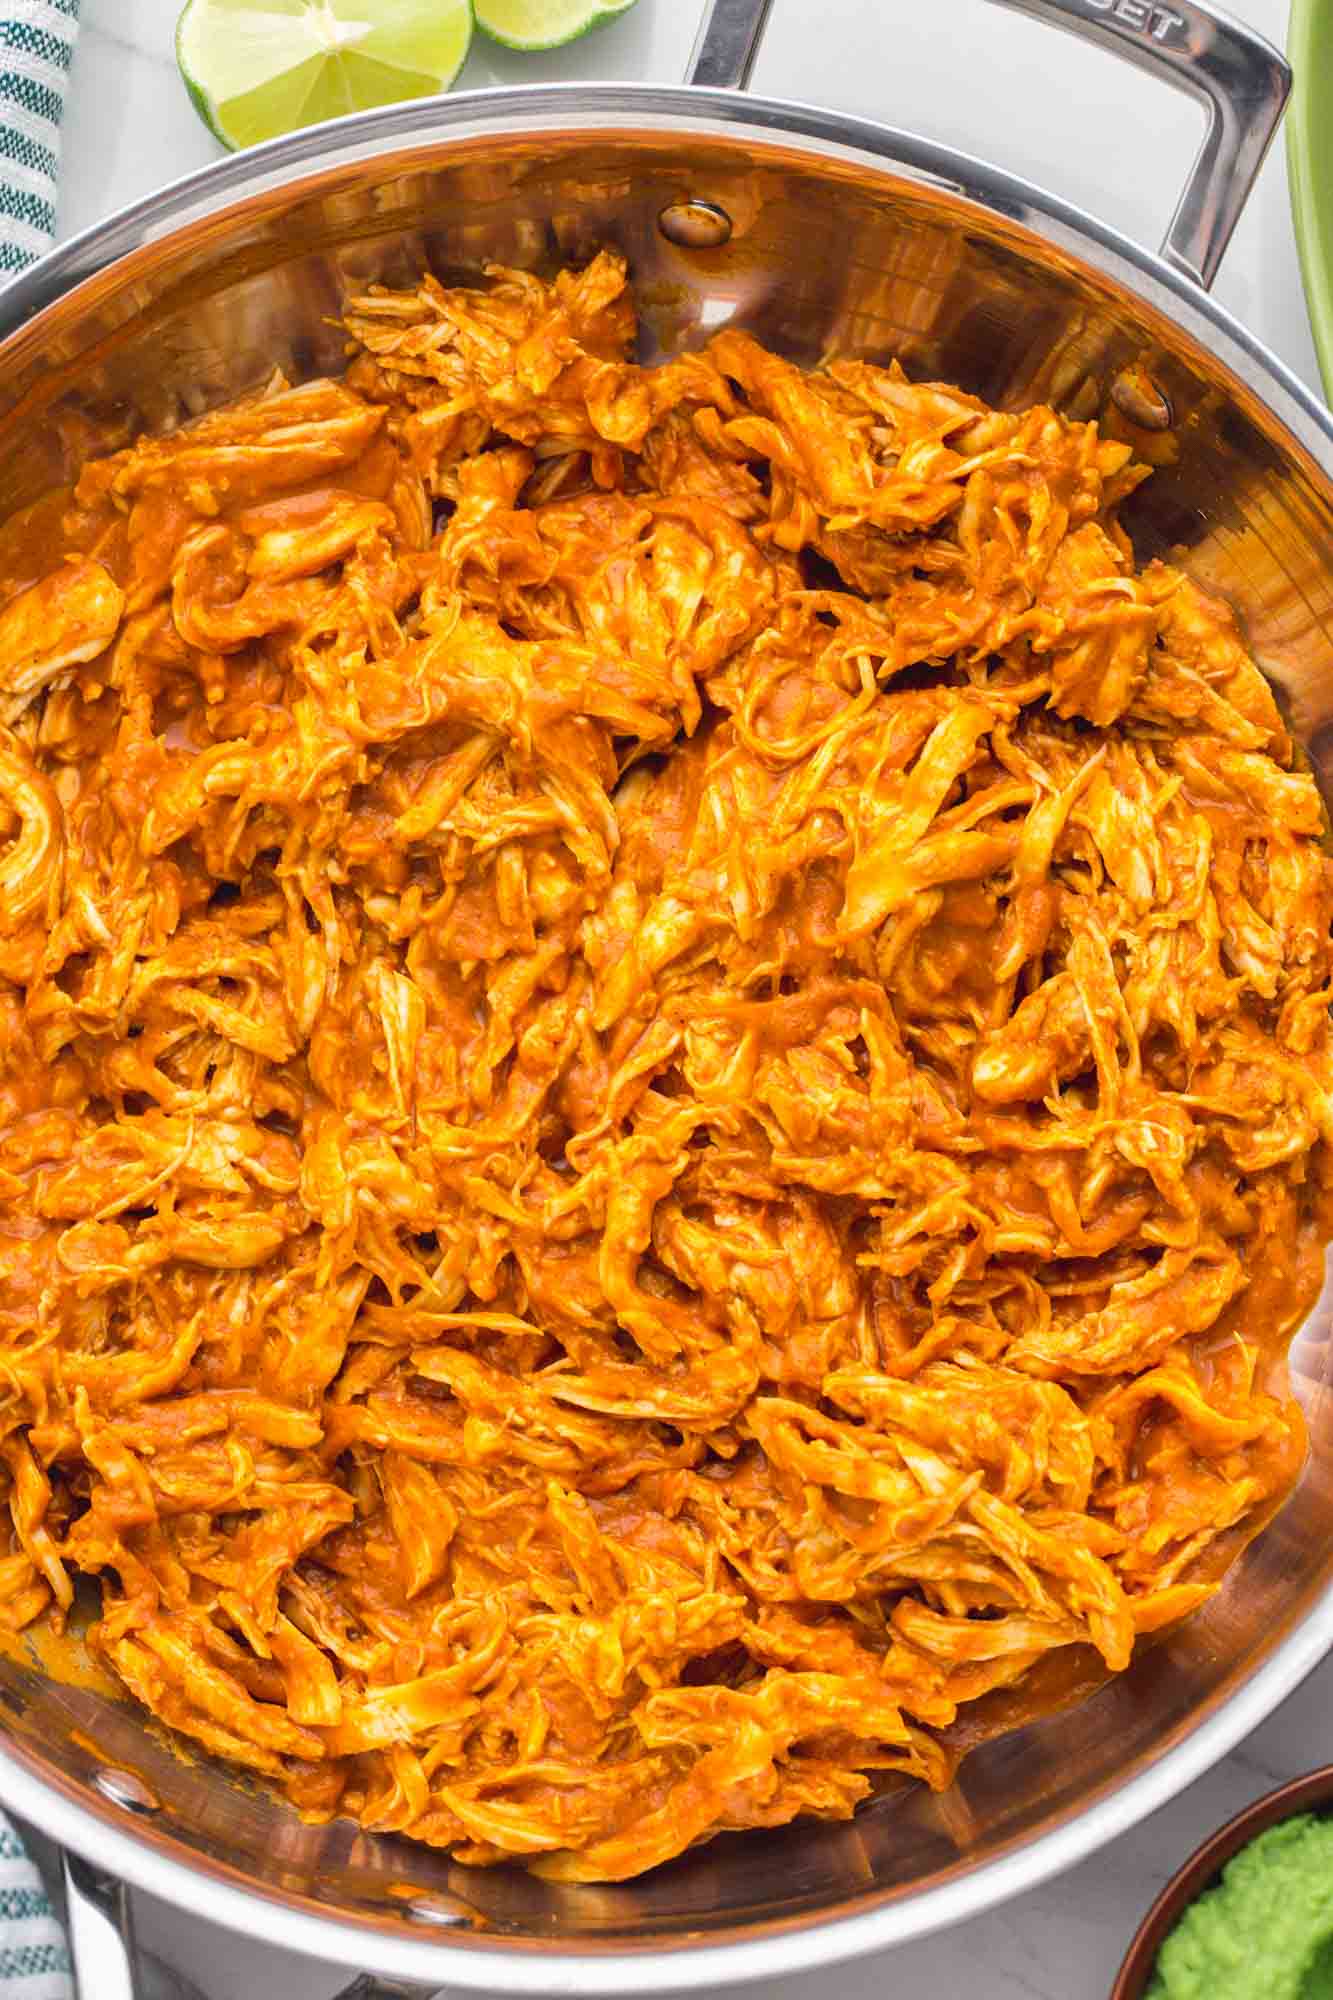 Chicken tinga in a stainless skillet made with shredded chicken